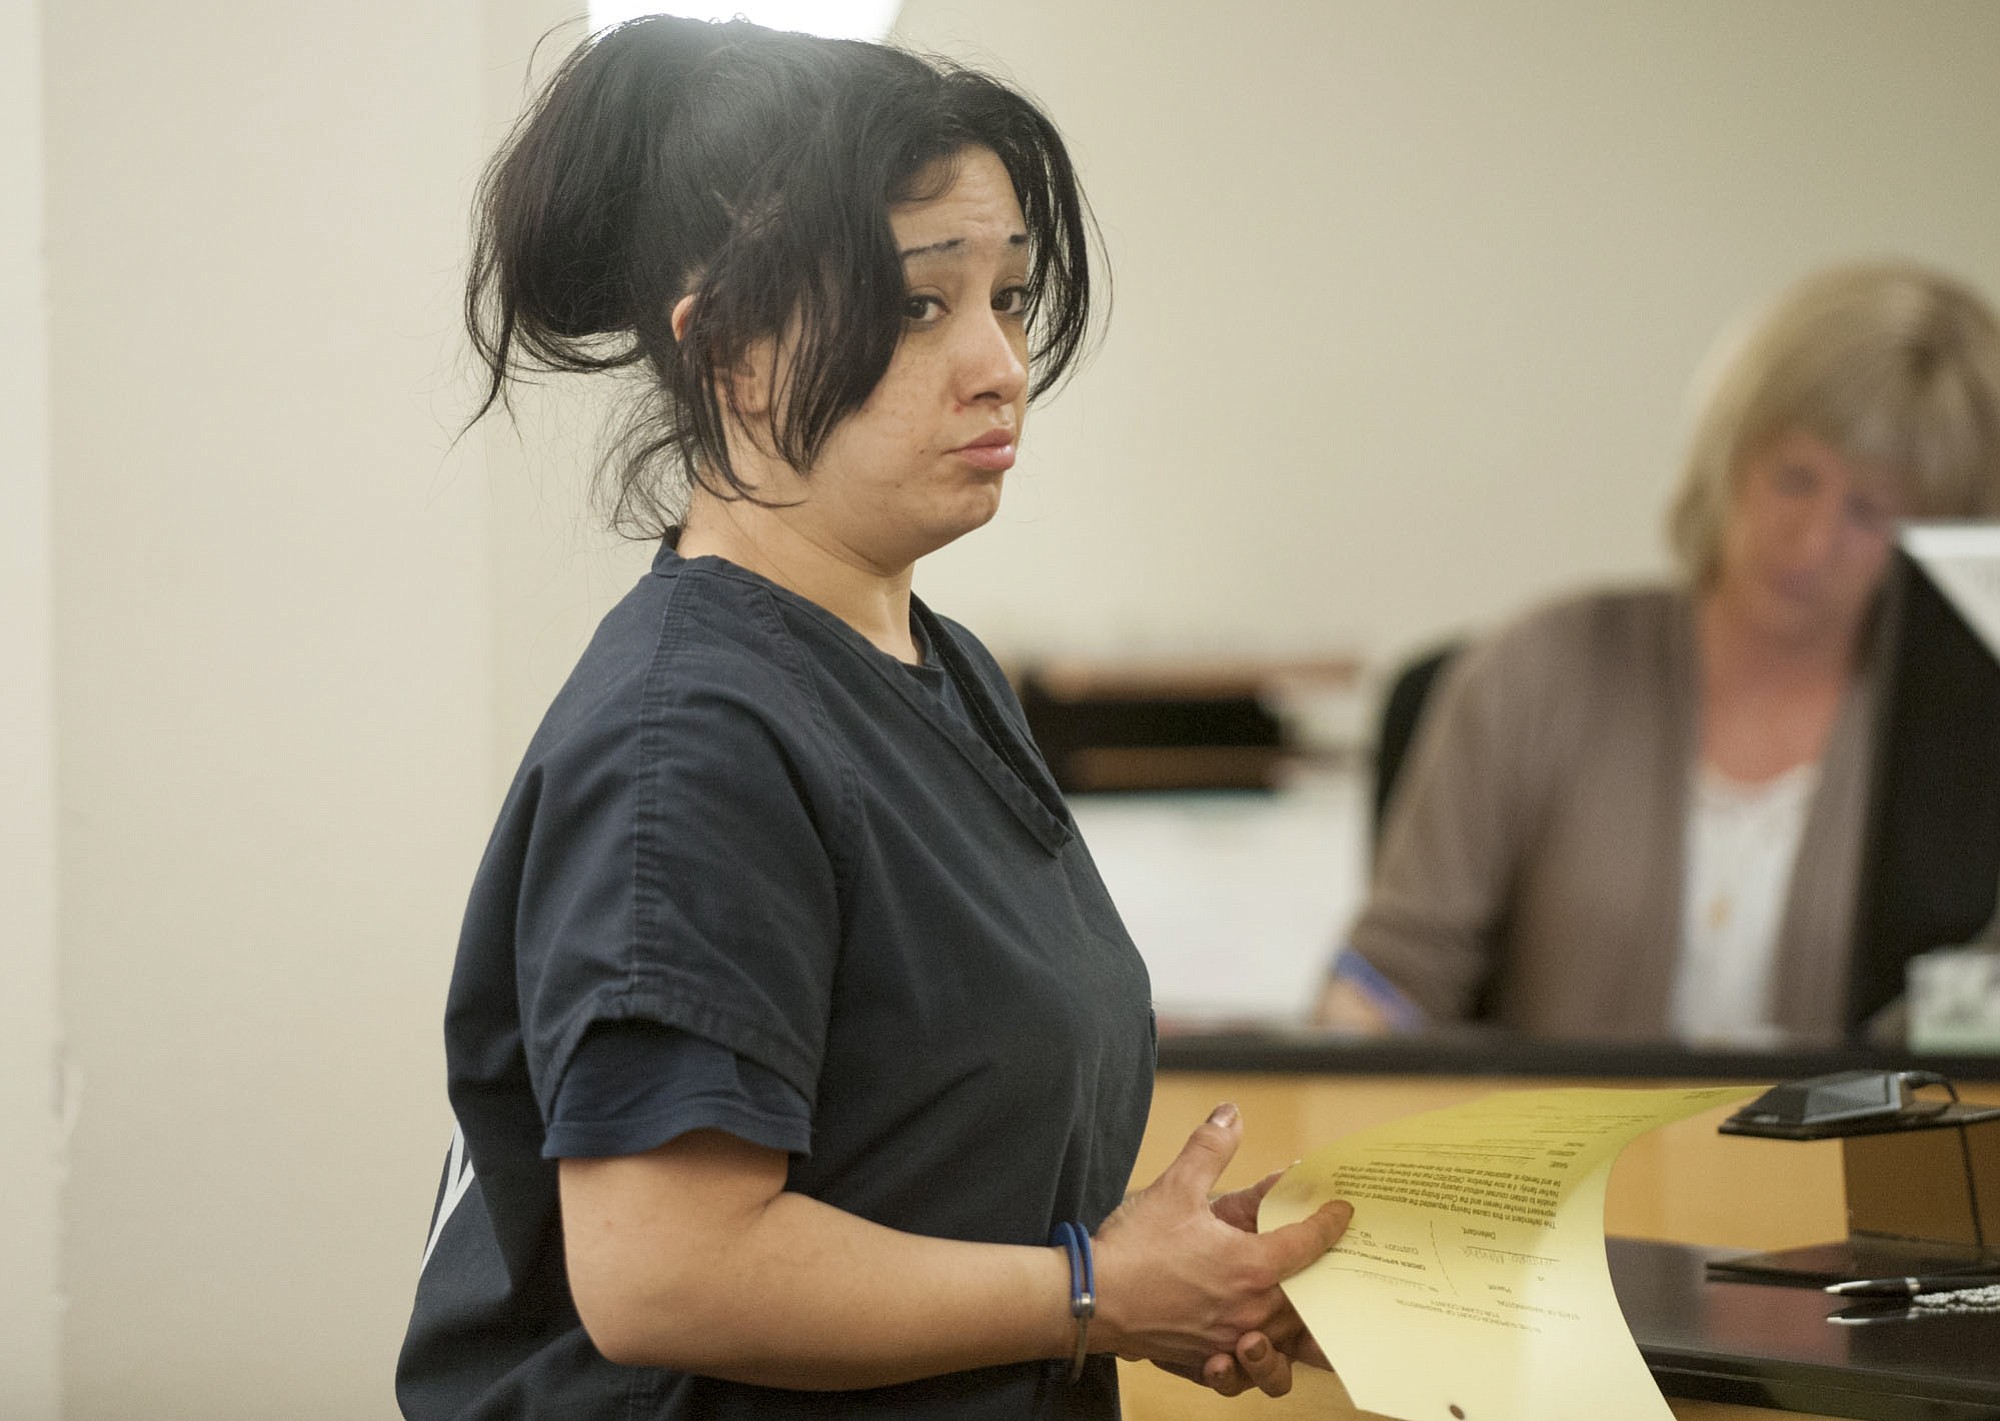 Marsha Perry, 36, makes her first appearance in Clark County Superior Court on April 27.